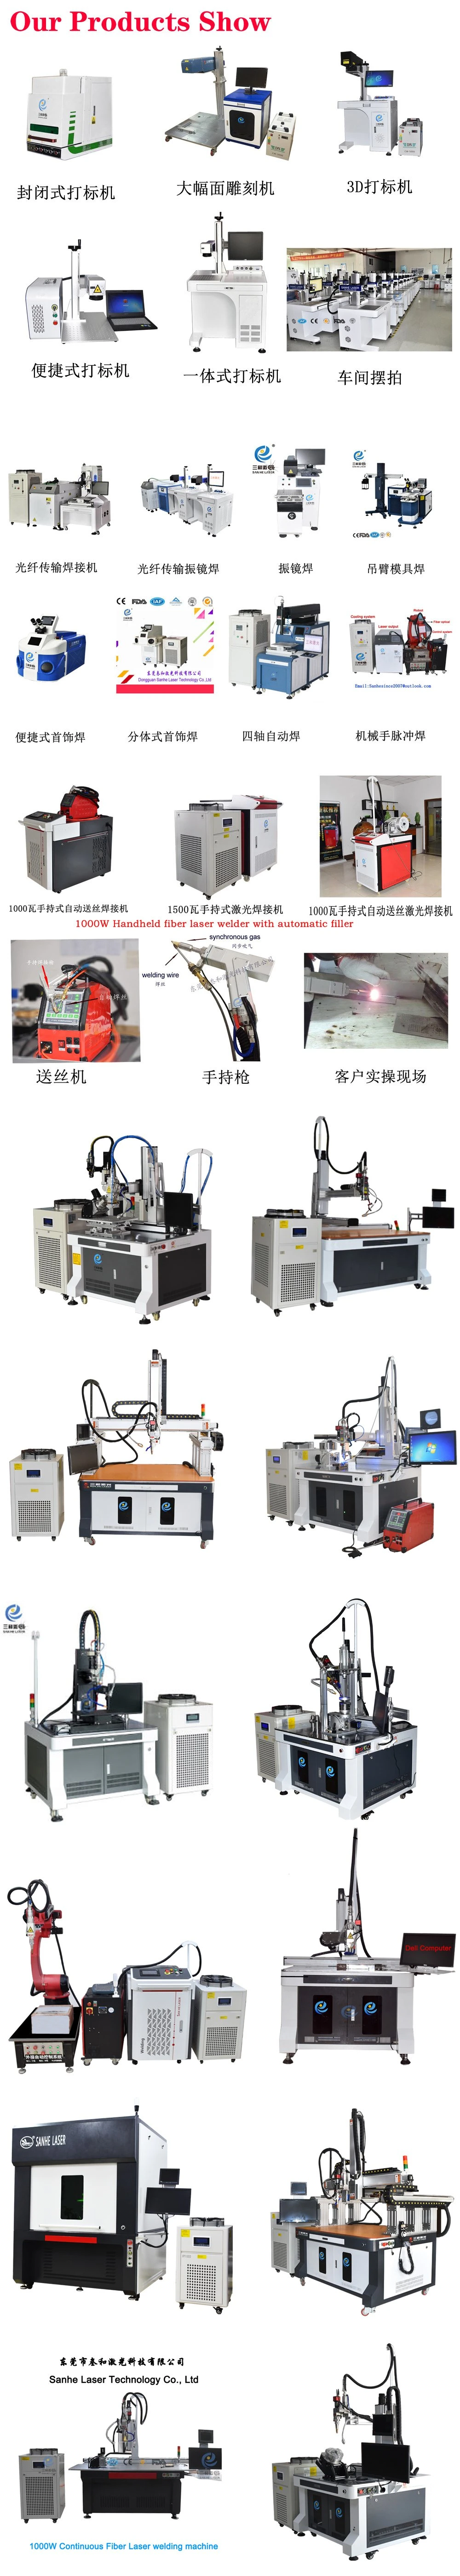 Portable Fiber Laser Engraving Marking Machine for Metal Jewelry Ring with Deep Inside Engrave